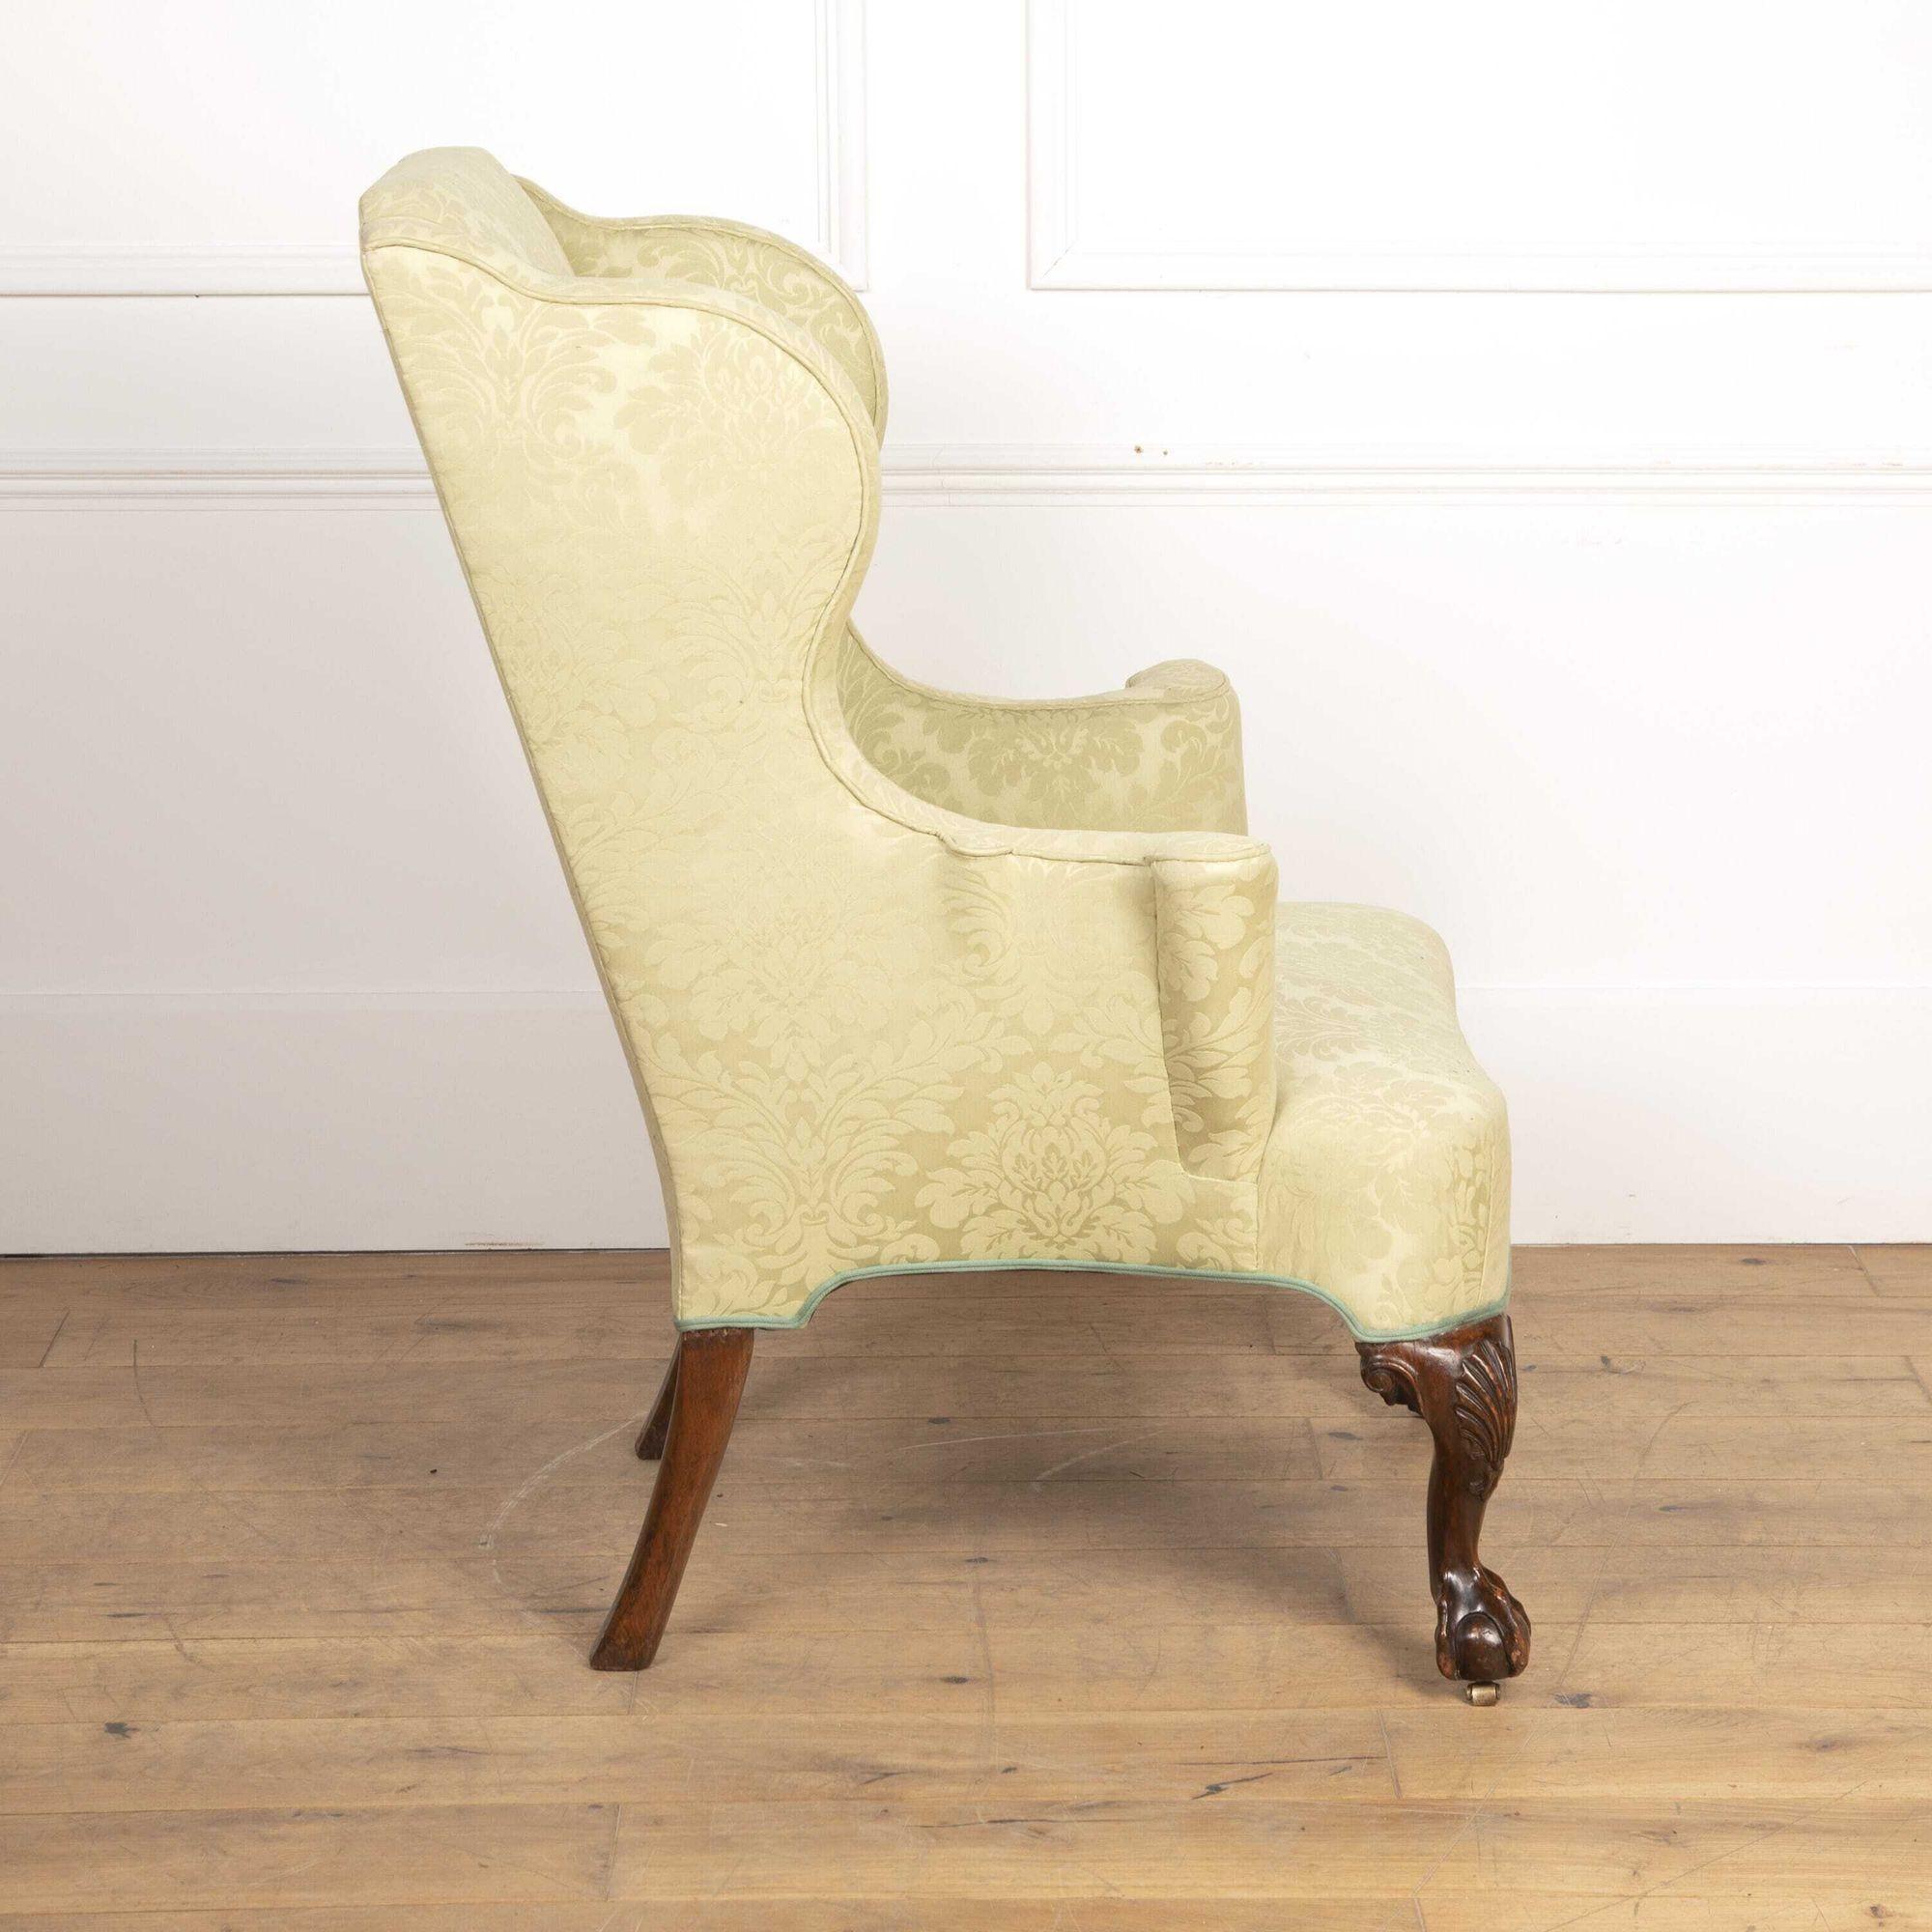 Fine quality 19th century walnut wing chair of classical form. 
This chair has been fully upholstered with deep wings and shaped sides running down into the out-scrolled arms on either side of the padded back and seat with shaped rail below.
The